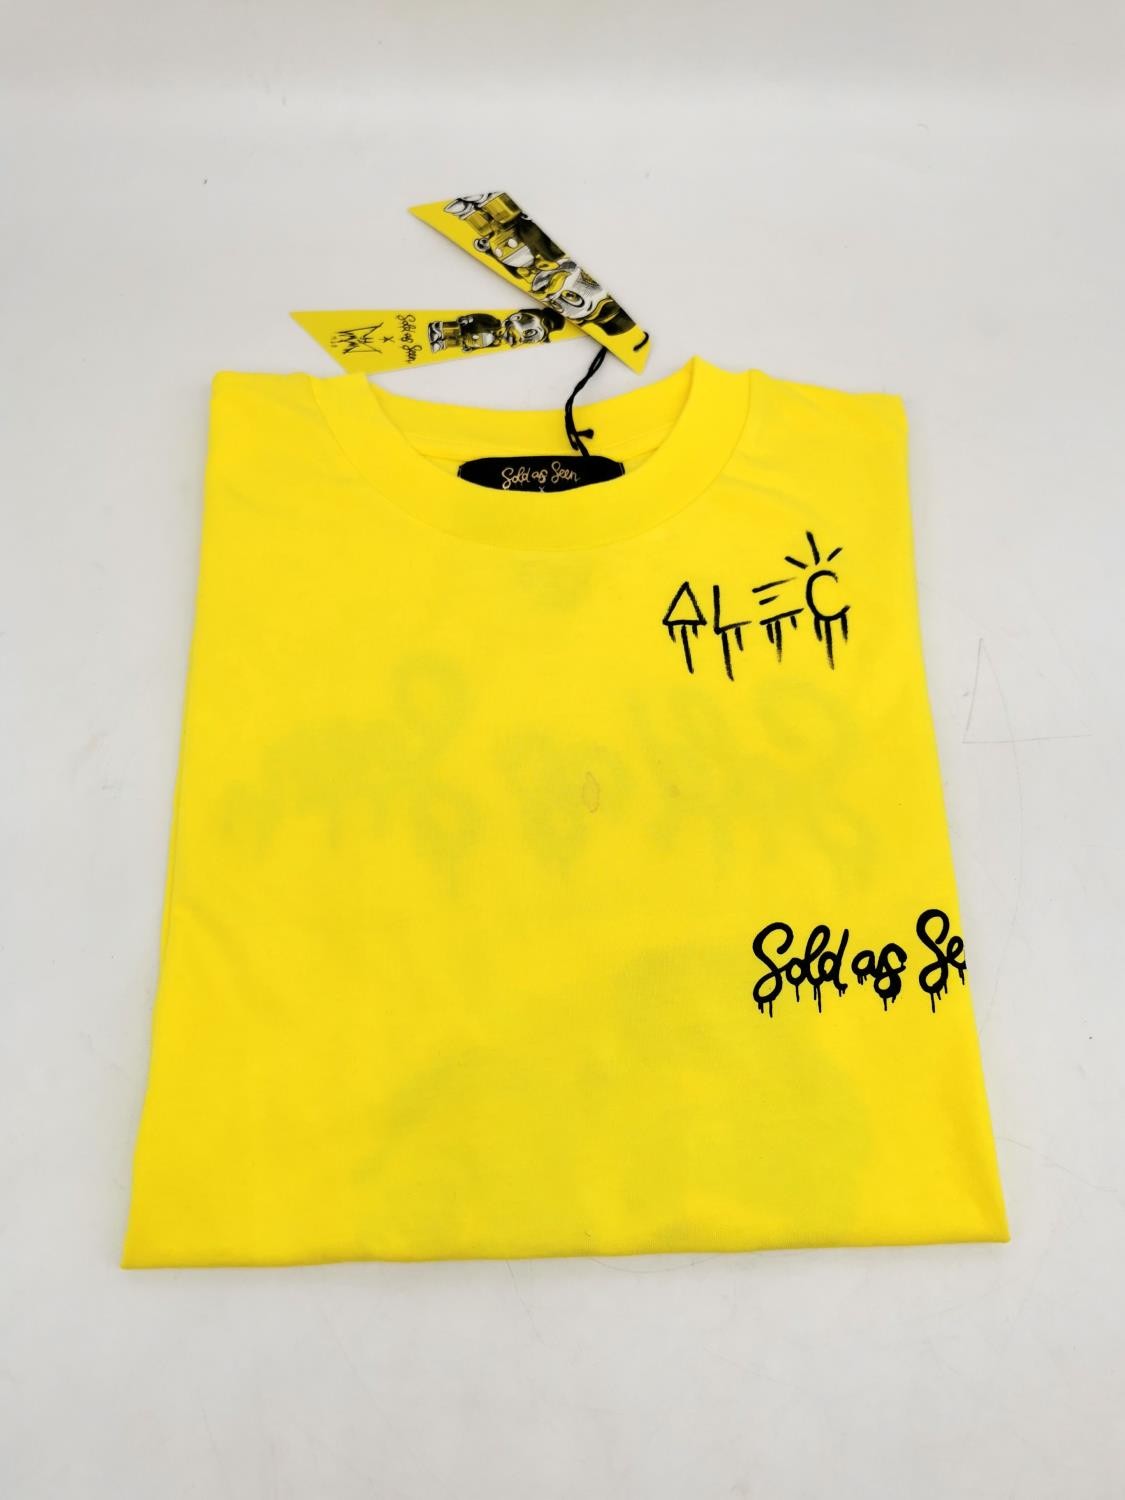 'Sold as Seen' signed T-shirt by the artist 'Alec Monopoly' size XS, measures 105cm from where the - Image 2 of 14